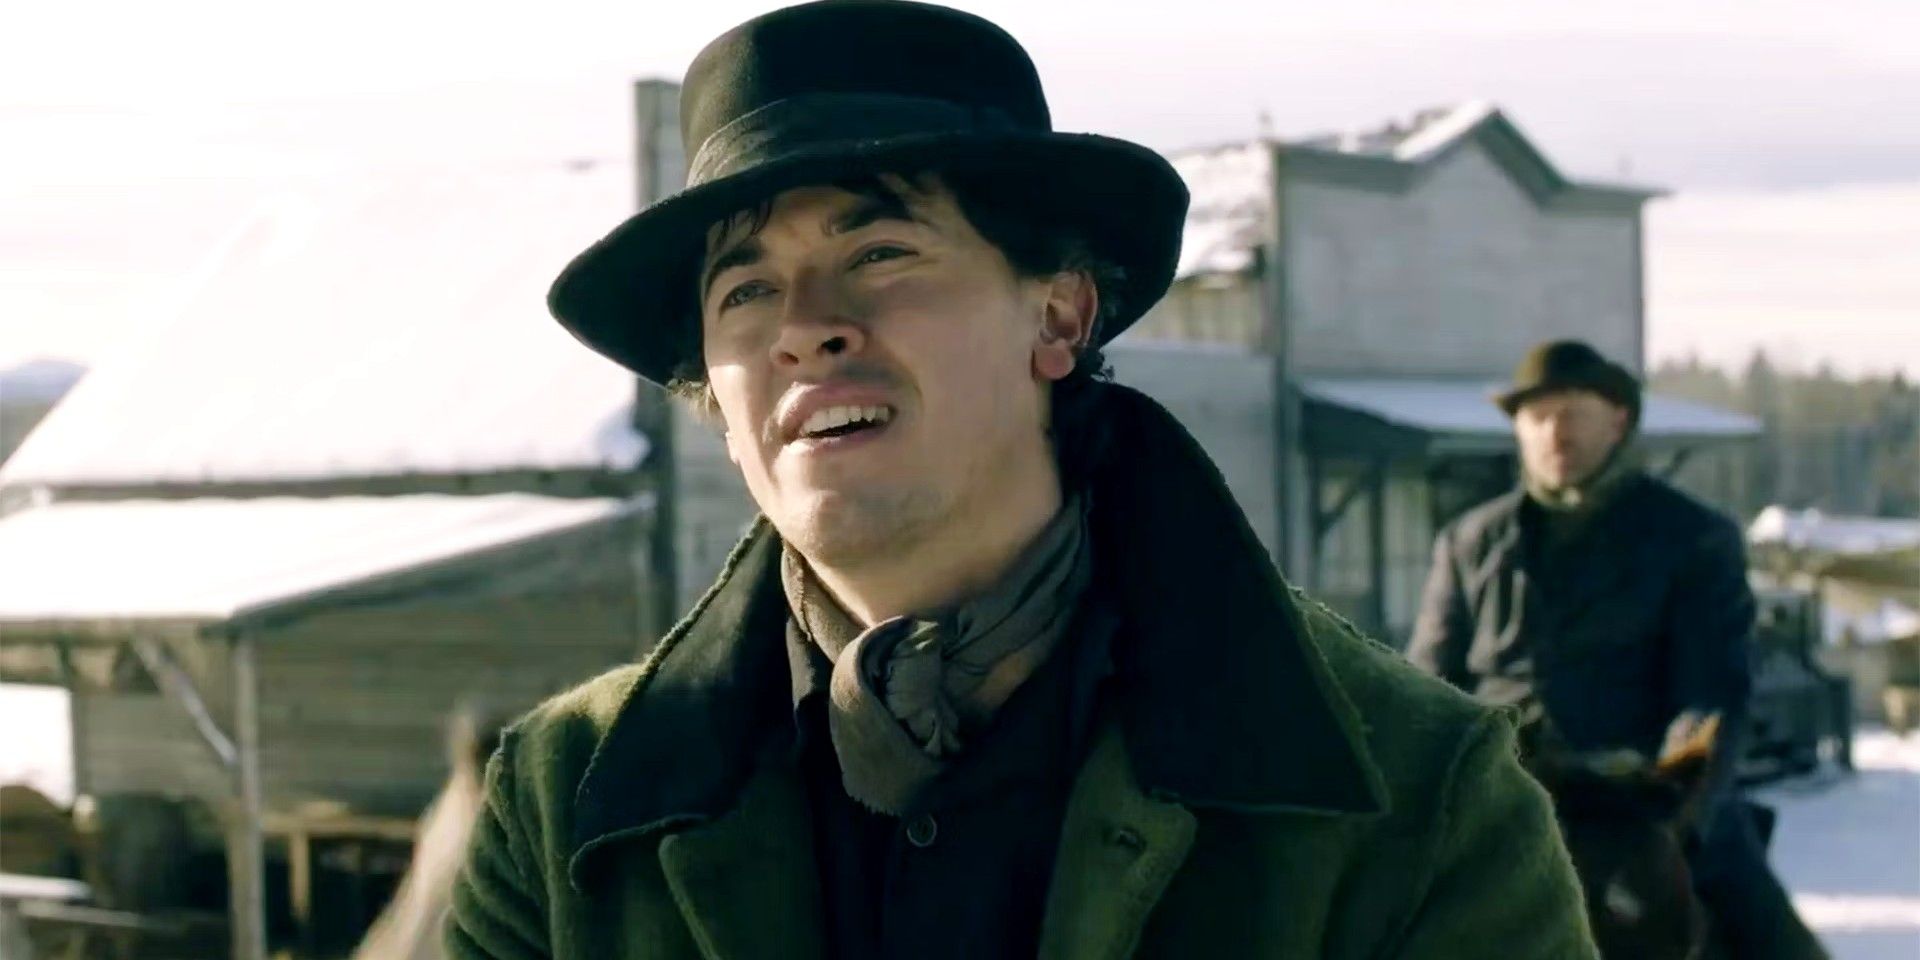 Hunger Games Star Tom Blyth Is Back In Action As Billy The Kid In Season 2 Part 2 Trailer